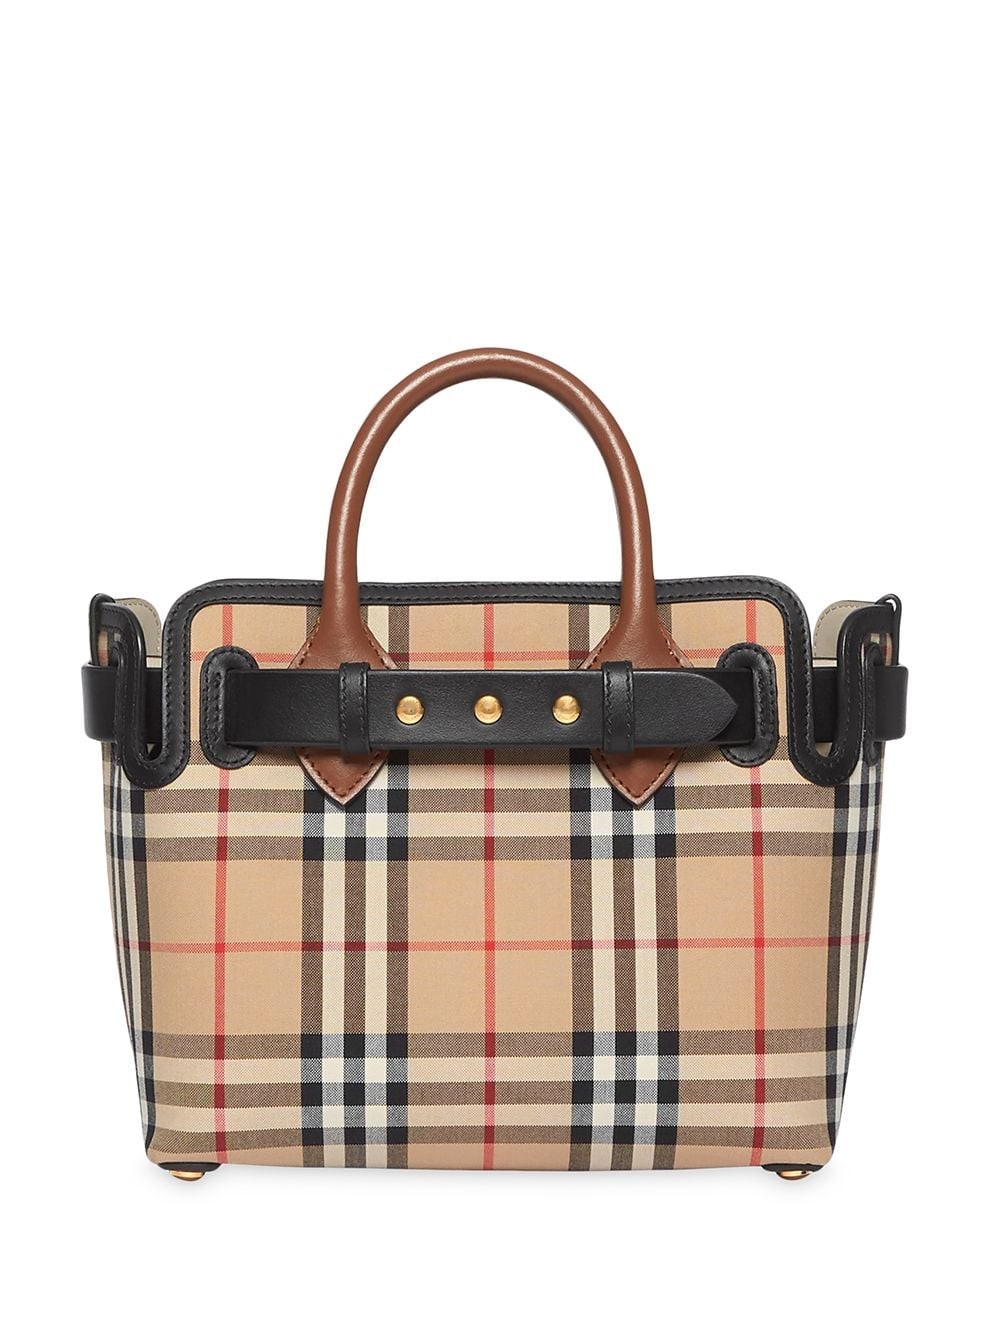 burberry tote bags